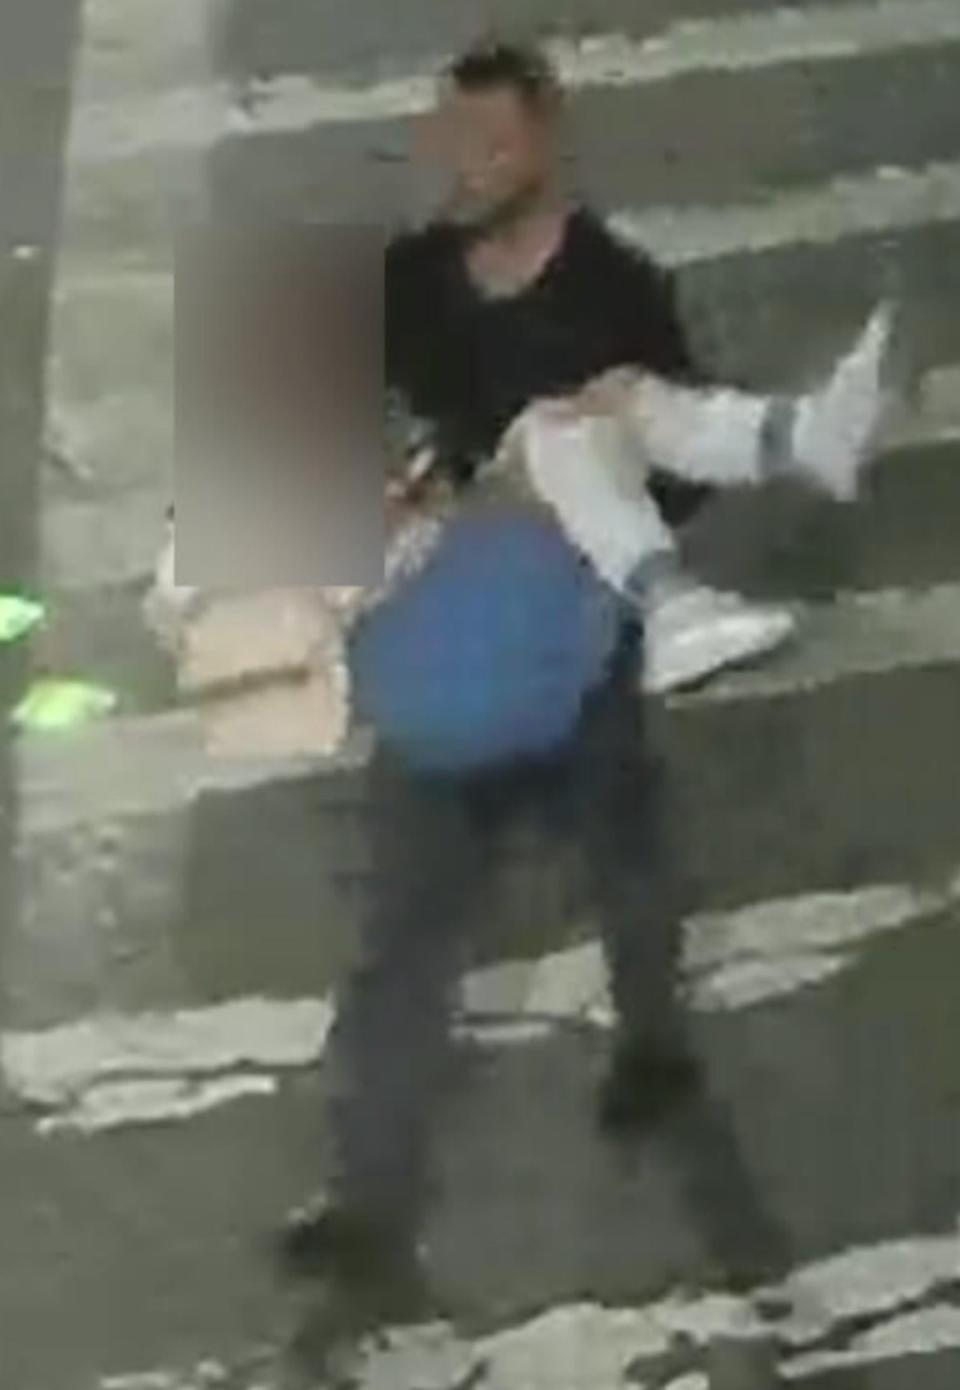 A second image shows the suspect carrying the victim (NYPD)